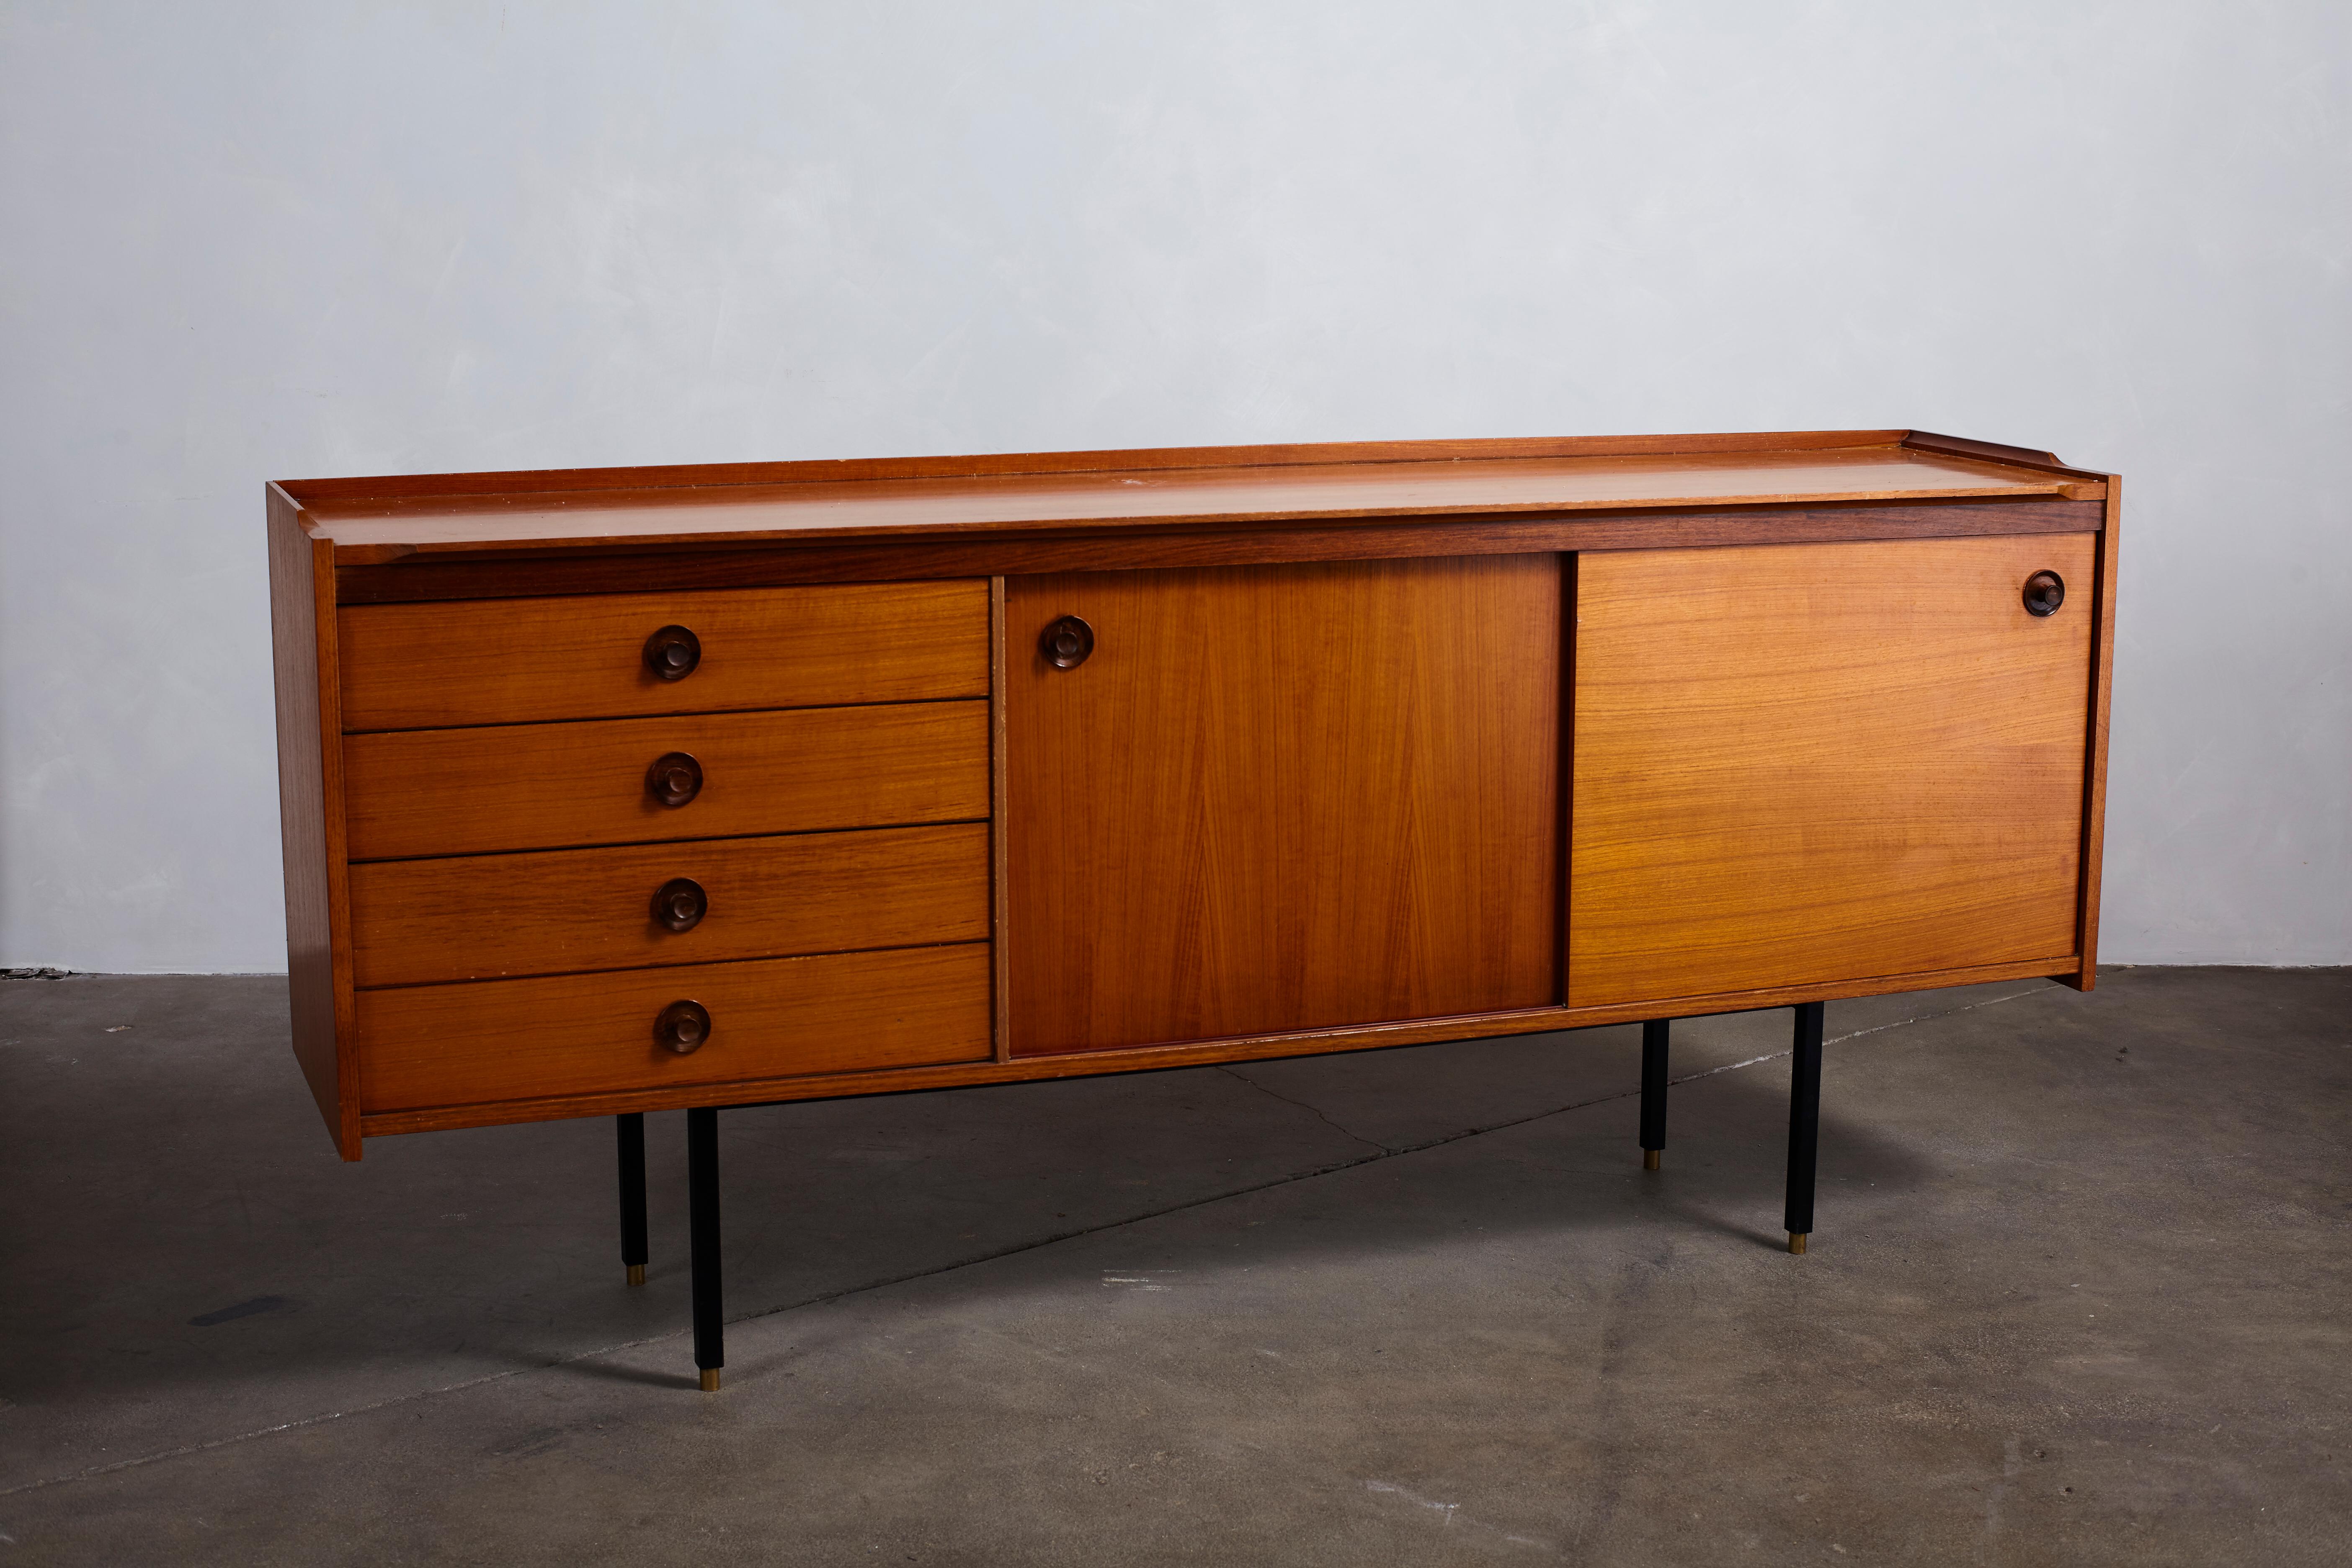 Italian midcentury Ico Parisi style credenza with four drawers and two drawers. Beautiful wood knob details. The credenza sits on a black metal base.